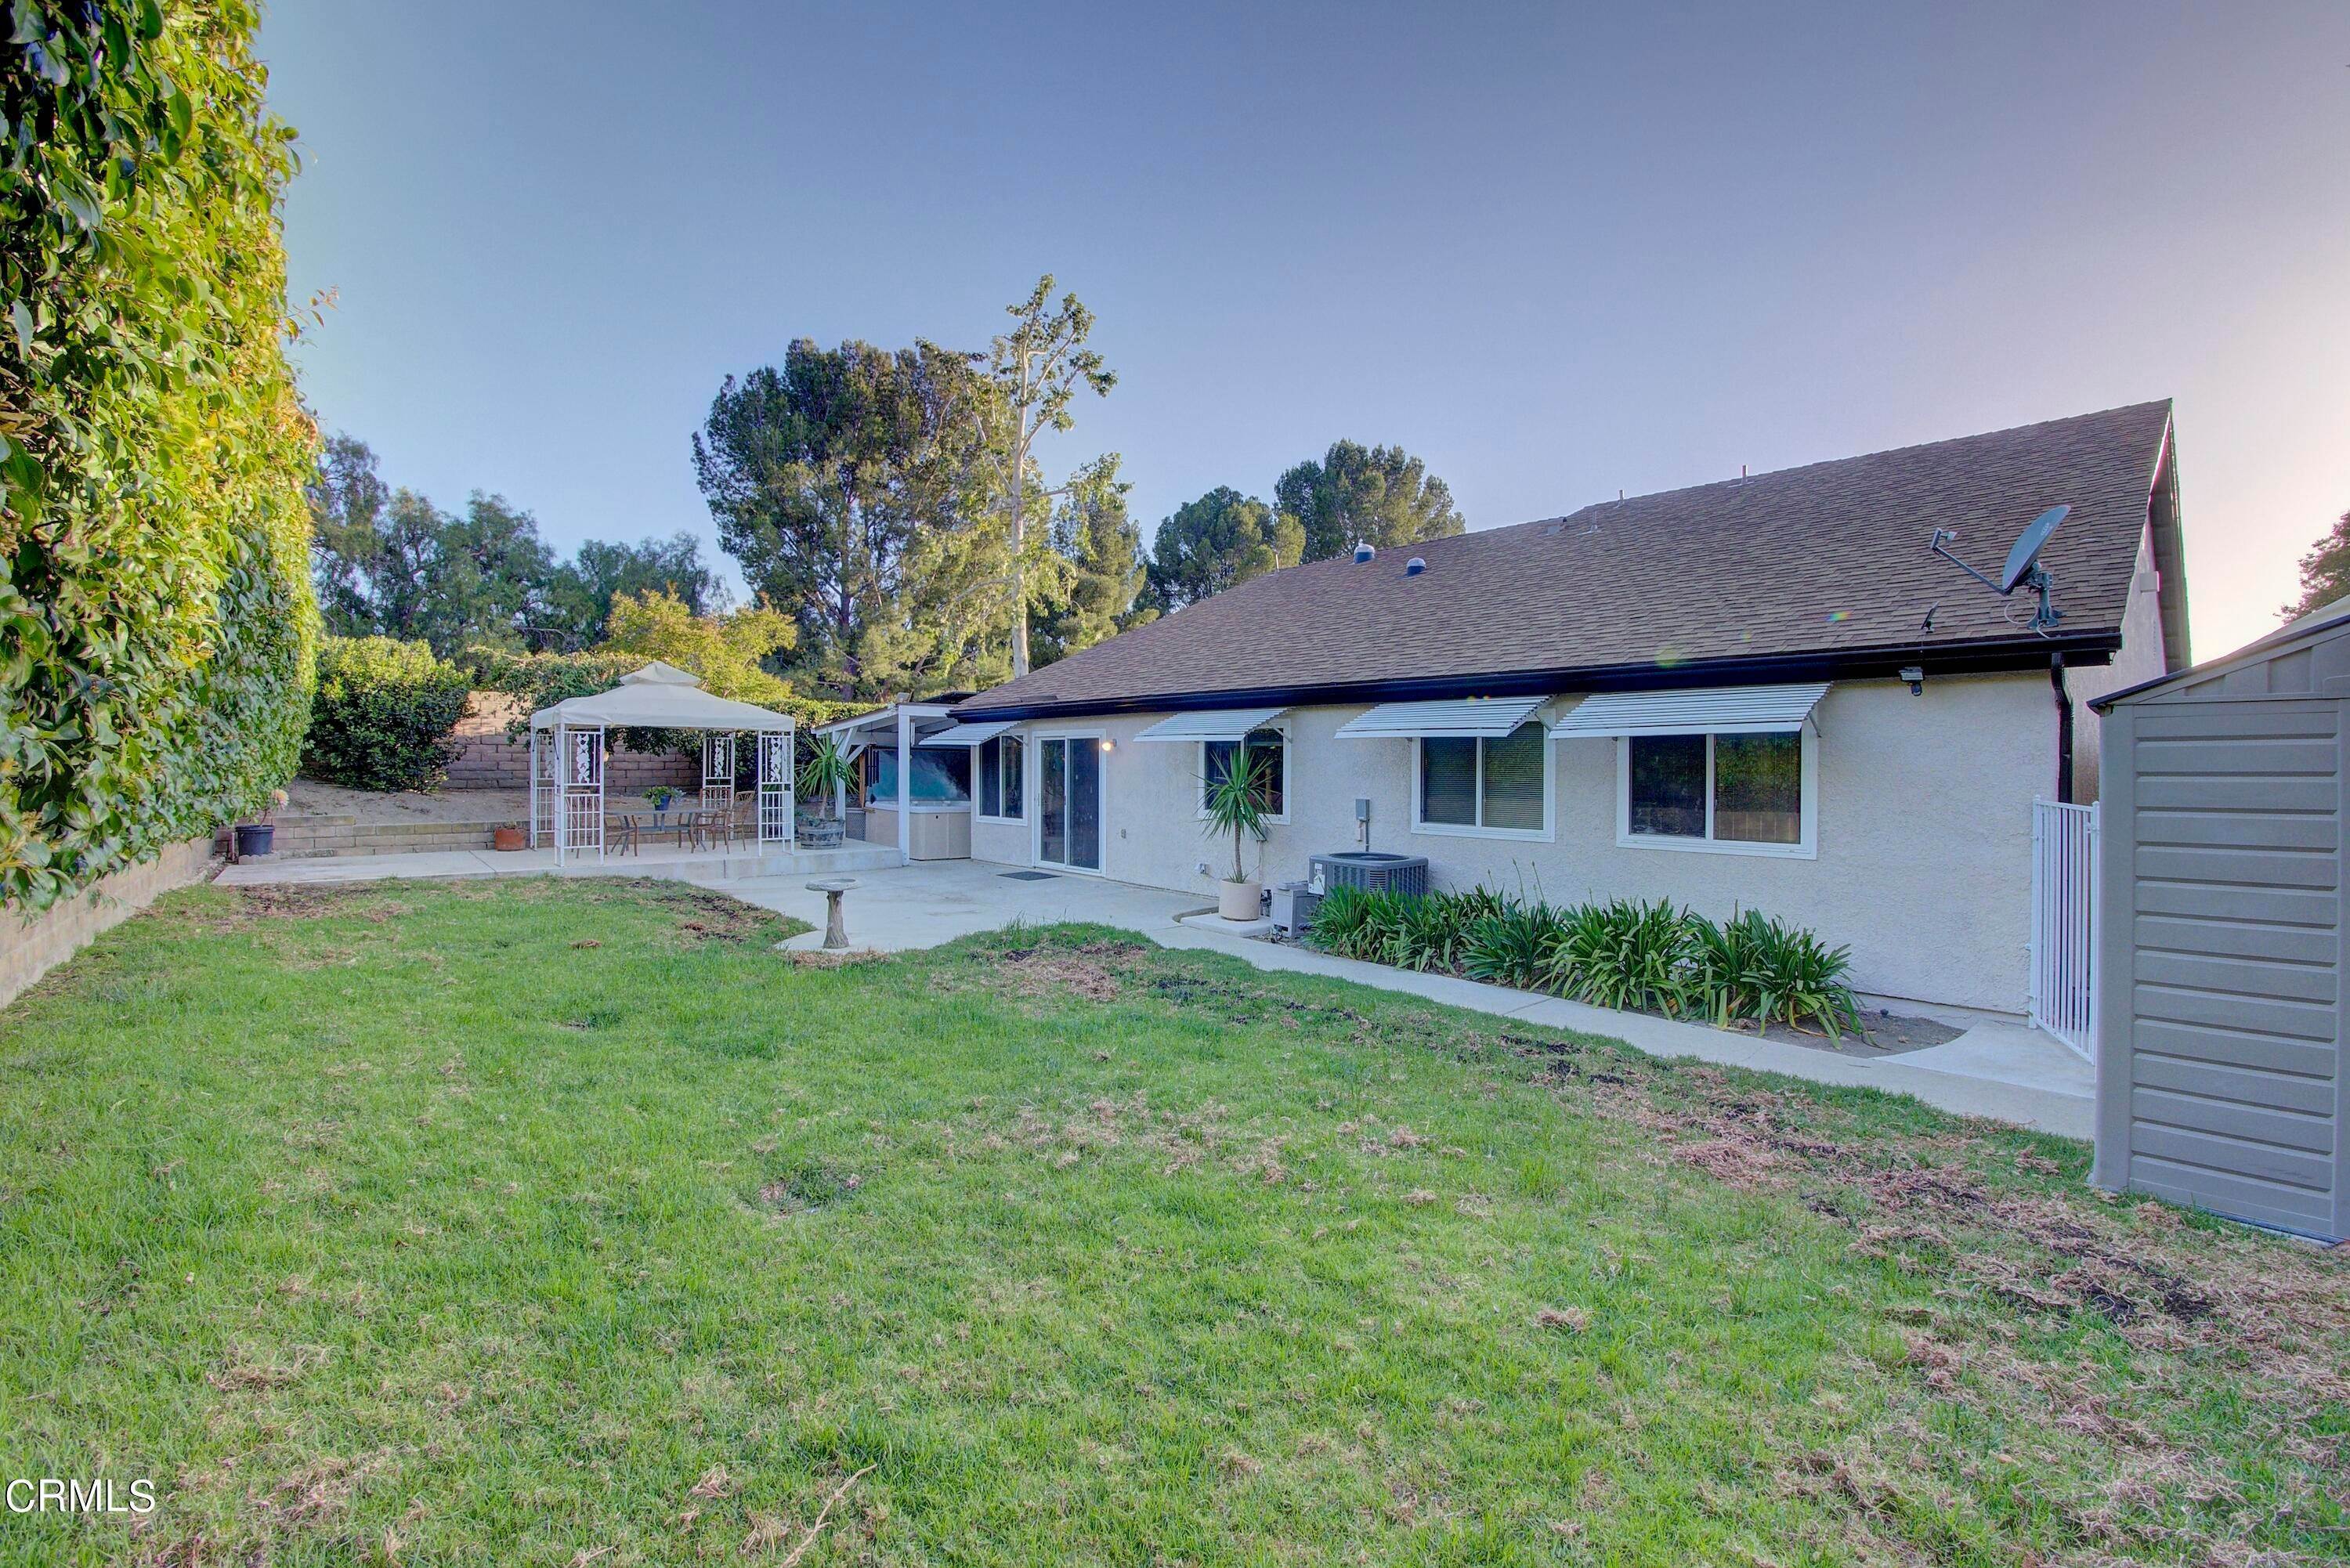 41. Single Family Homes for Sale at 2606 Wheatfield Circle Simi Valley, California 93063 United States